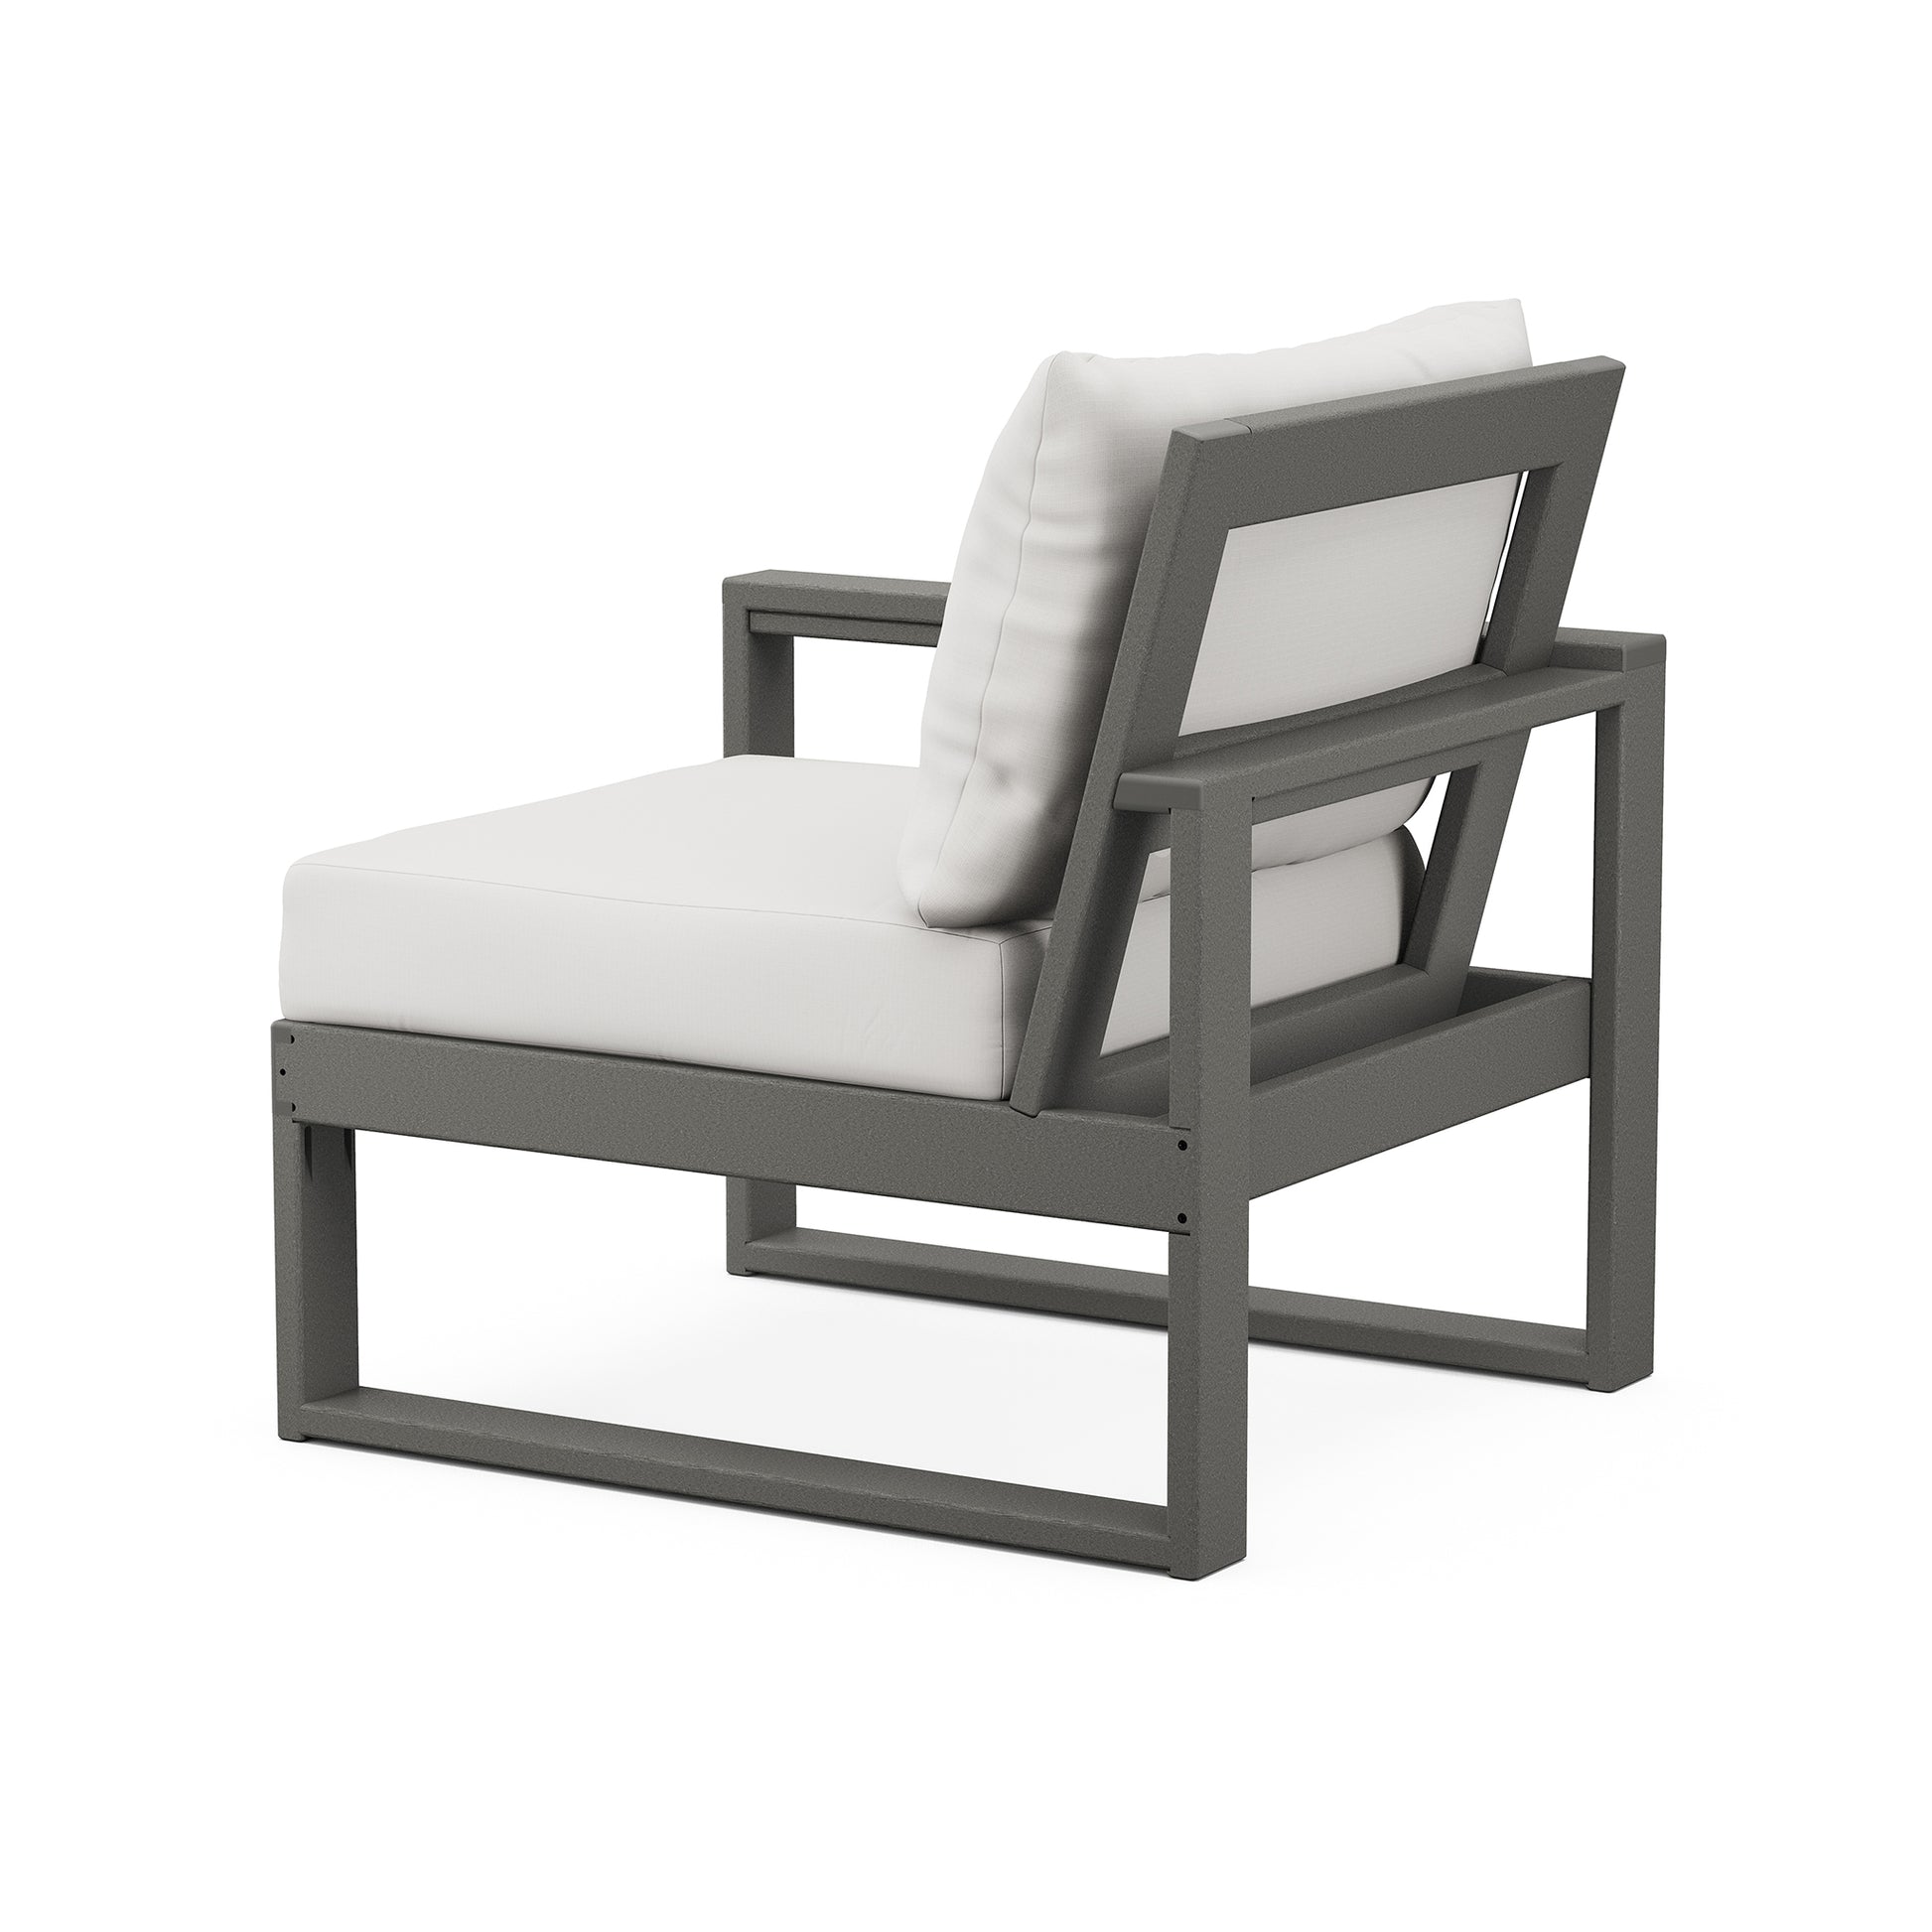 A modern outdoor chair with a gray POLYWOOD® EDGE frame and thick, white cushions on a white background. The chair's design is minimalist and stylish, suitable for contemporary interiors.